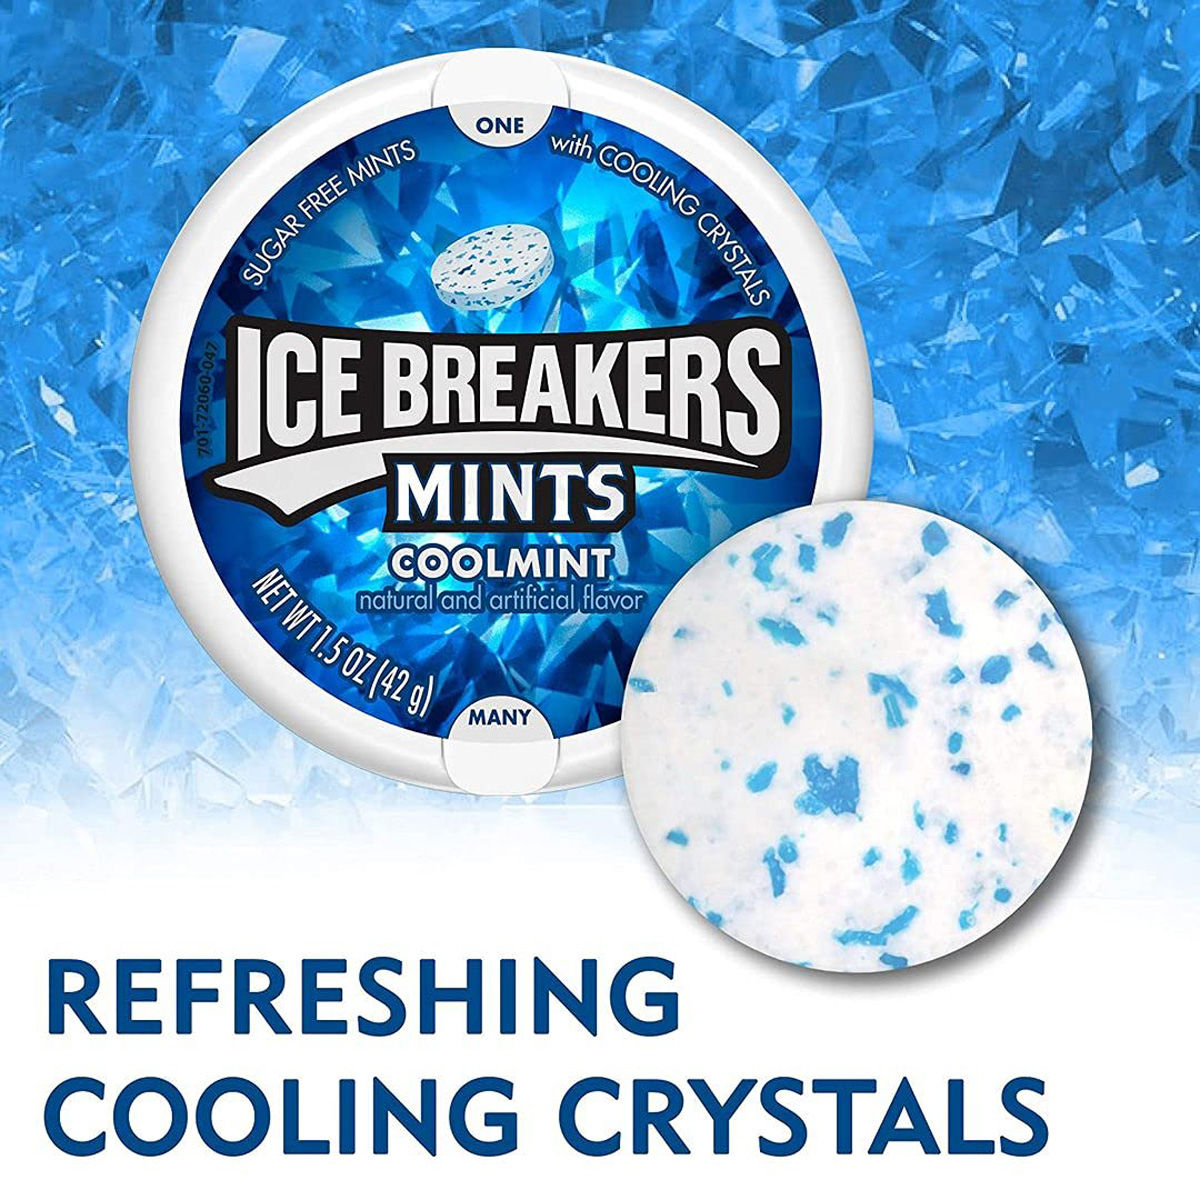 Ice Breaker Sugarfree Coolmint Mouth Freshner Mints, 42 gm, Pack of 1 